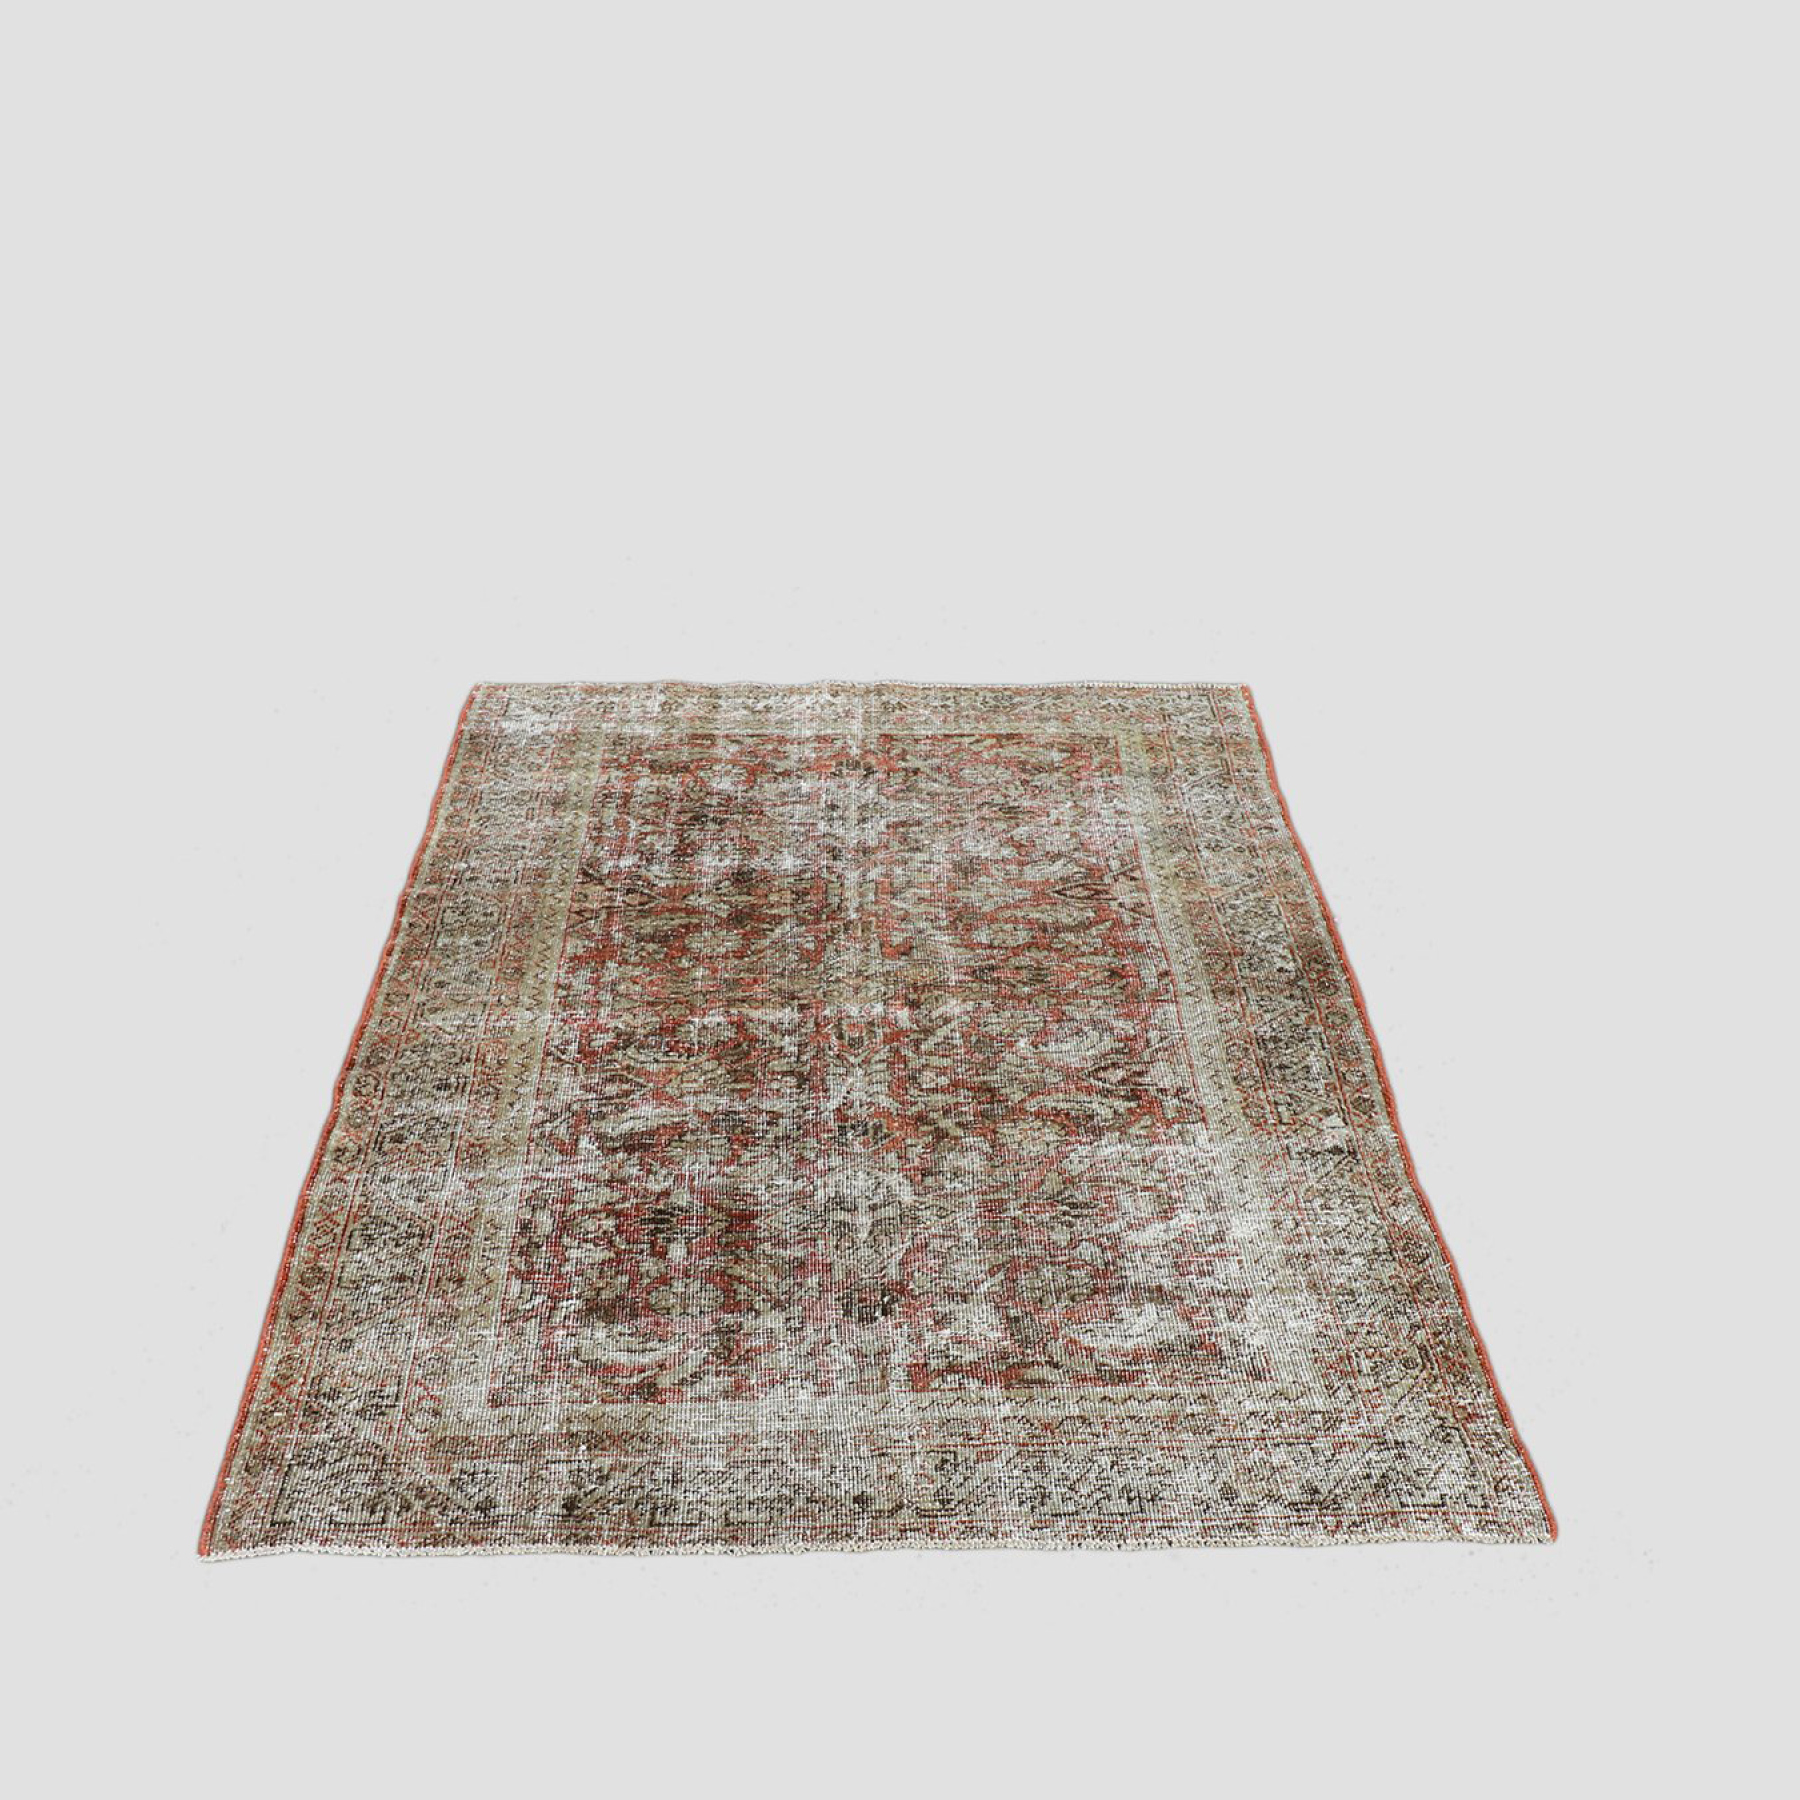 ALL-SORTS-OF-SHOPPE-RUG-CYRUS